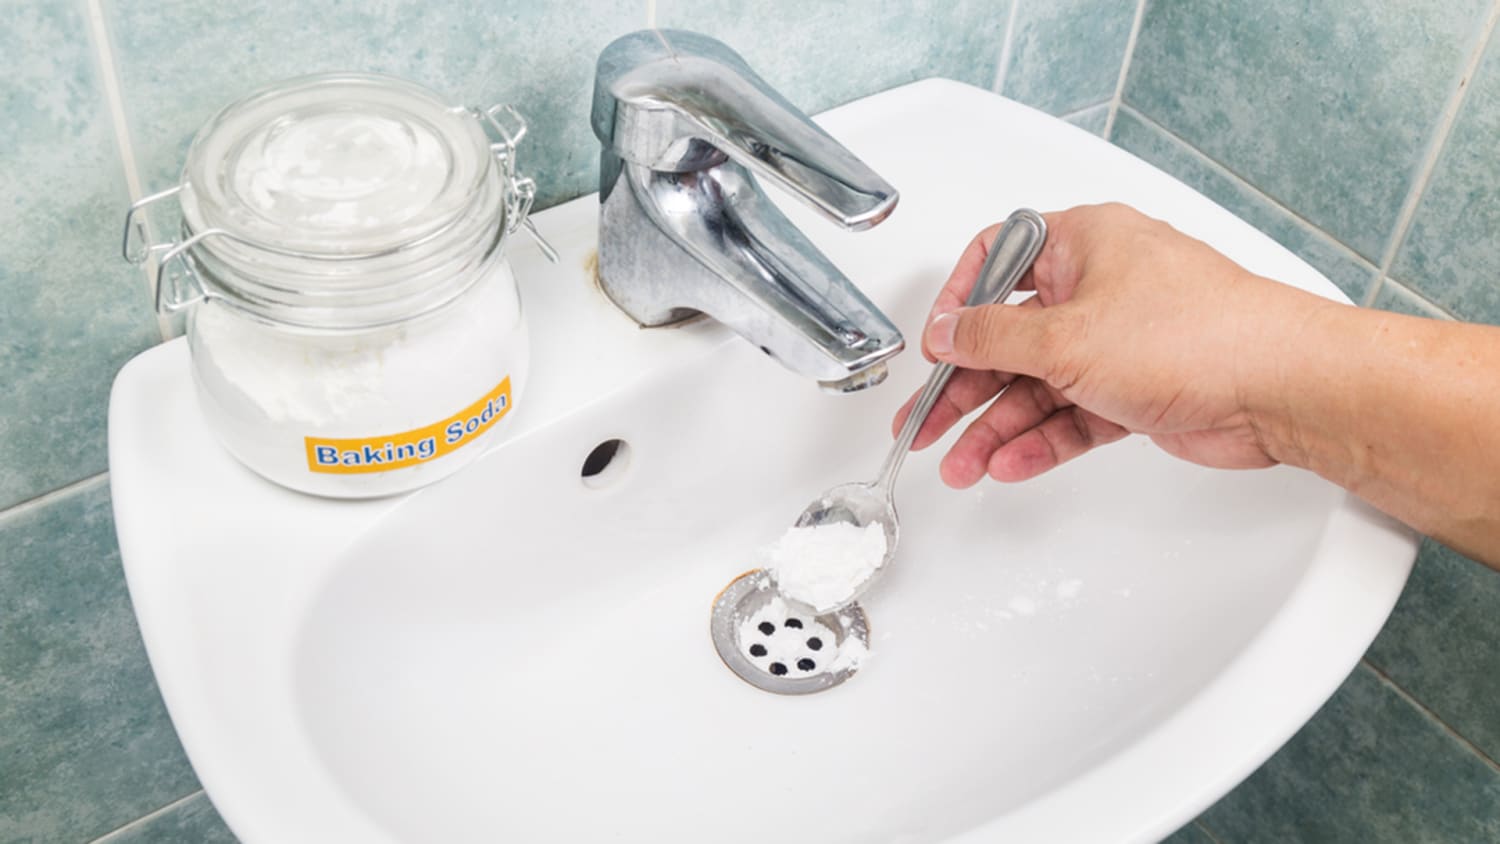 Unclog A Drain Without Calling Plumber, Home Remedies For Clogged Bathtub Drains